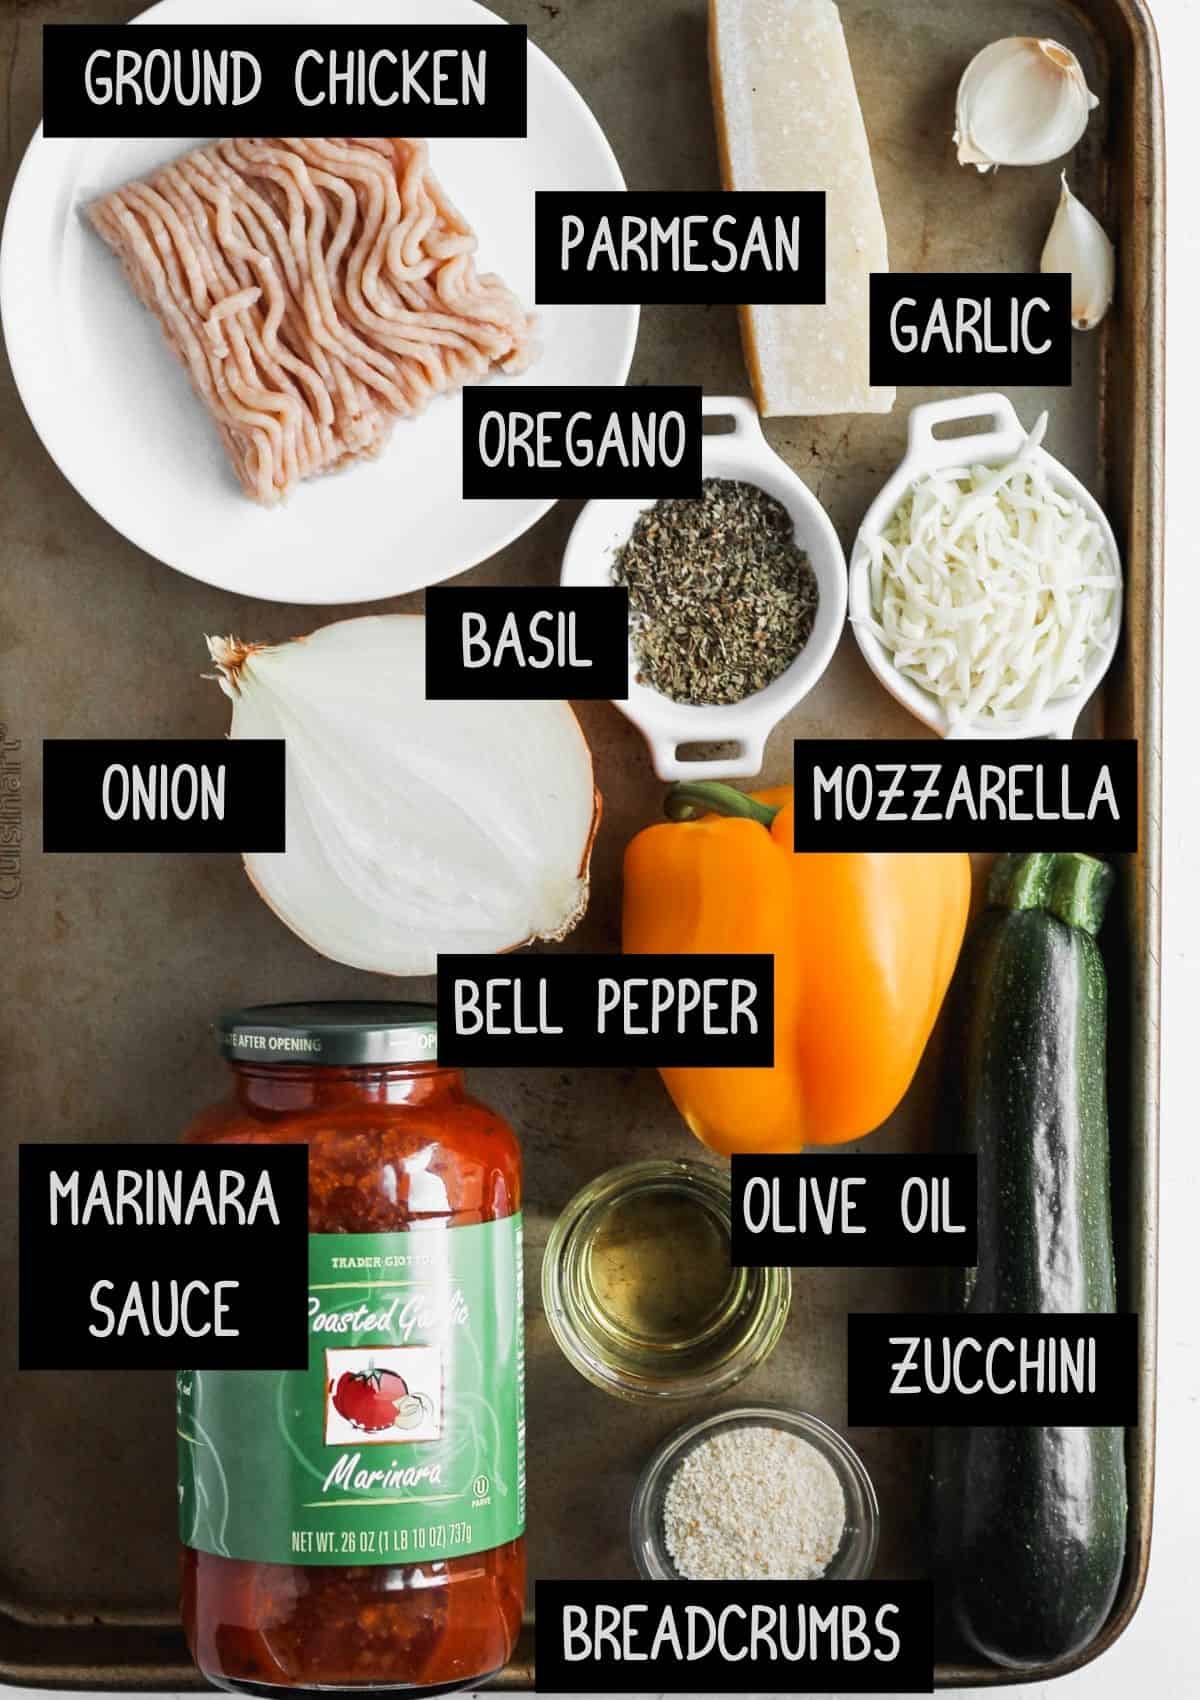 Labelled ingredients (see recipe for details).